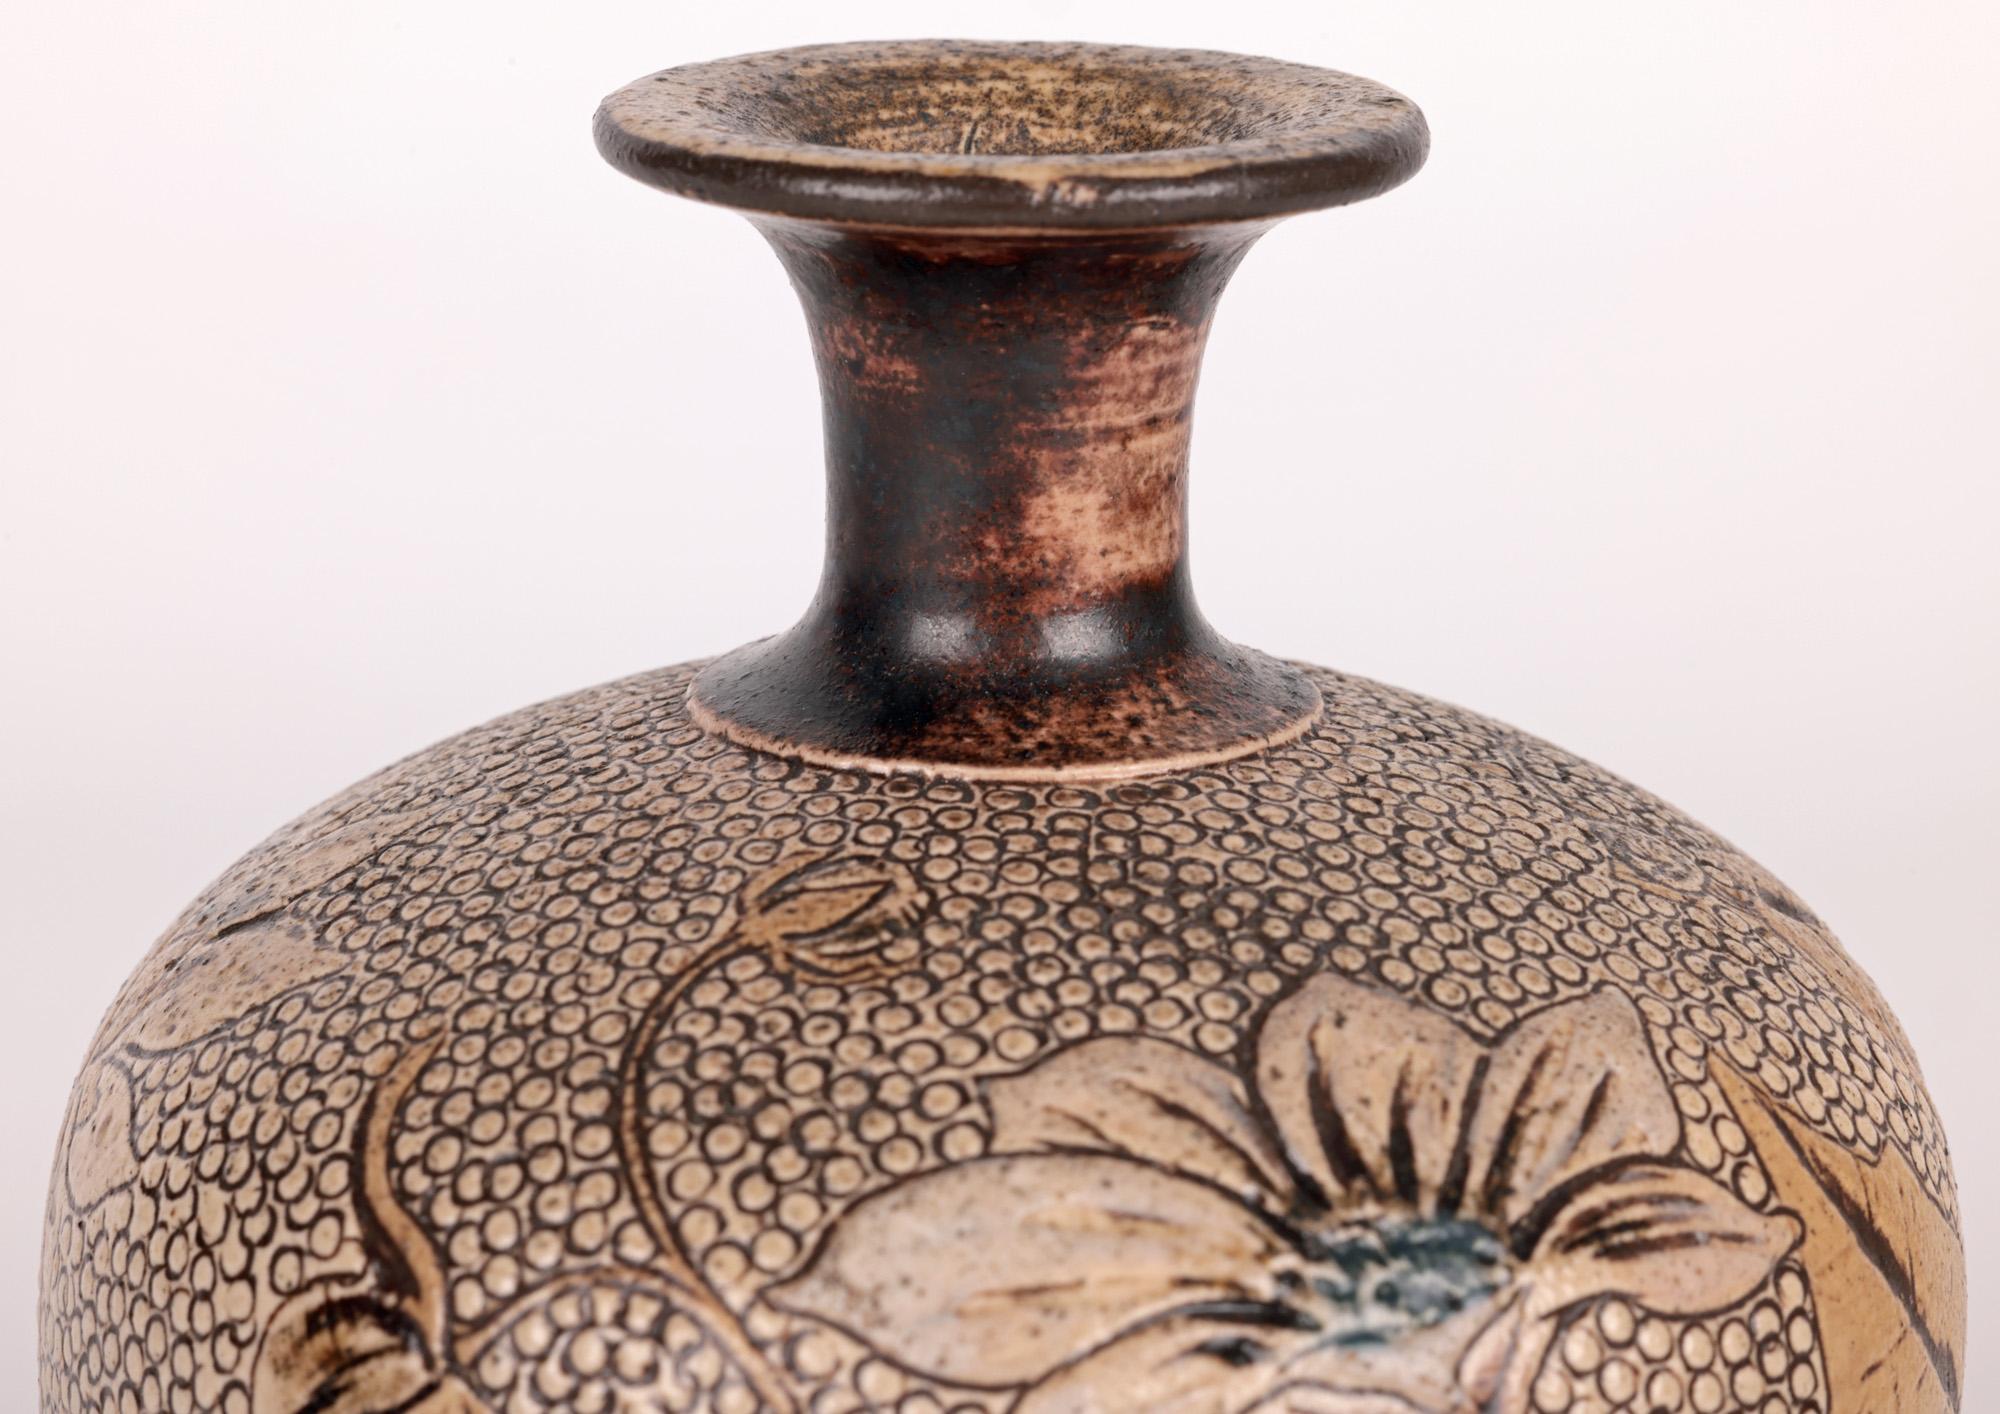 An exceptional early Martin Brothers floral decorated vase by Robert Wallace Martin dated 1881. This finely made stoneware vase is of rounded bulbous shape standing on a narrow round pedestal foot and with a narrow funnel neck top with a wide folded